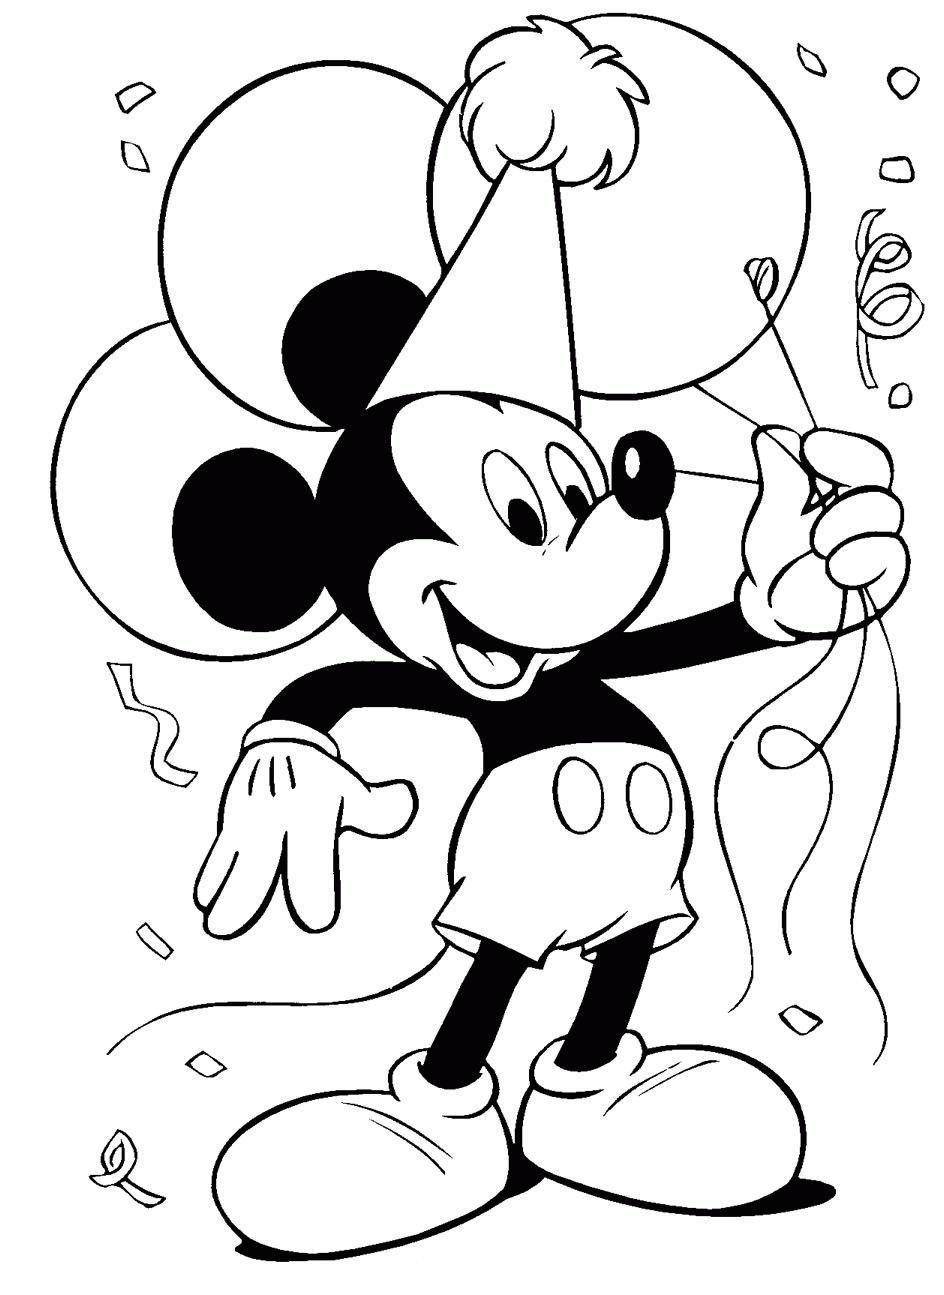 Coloring Festive Mickey mouse. Category Mickey mouse. Tags:  Disney, Mickey Mouse.